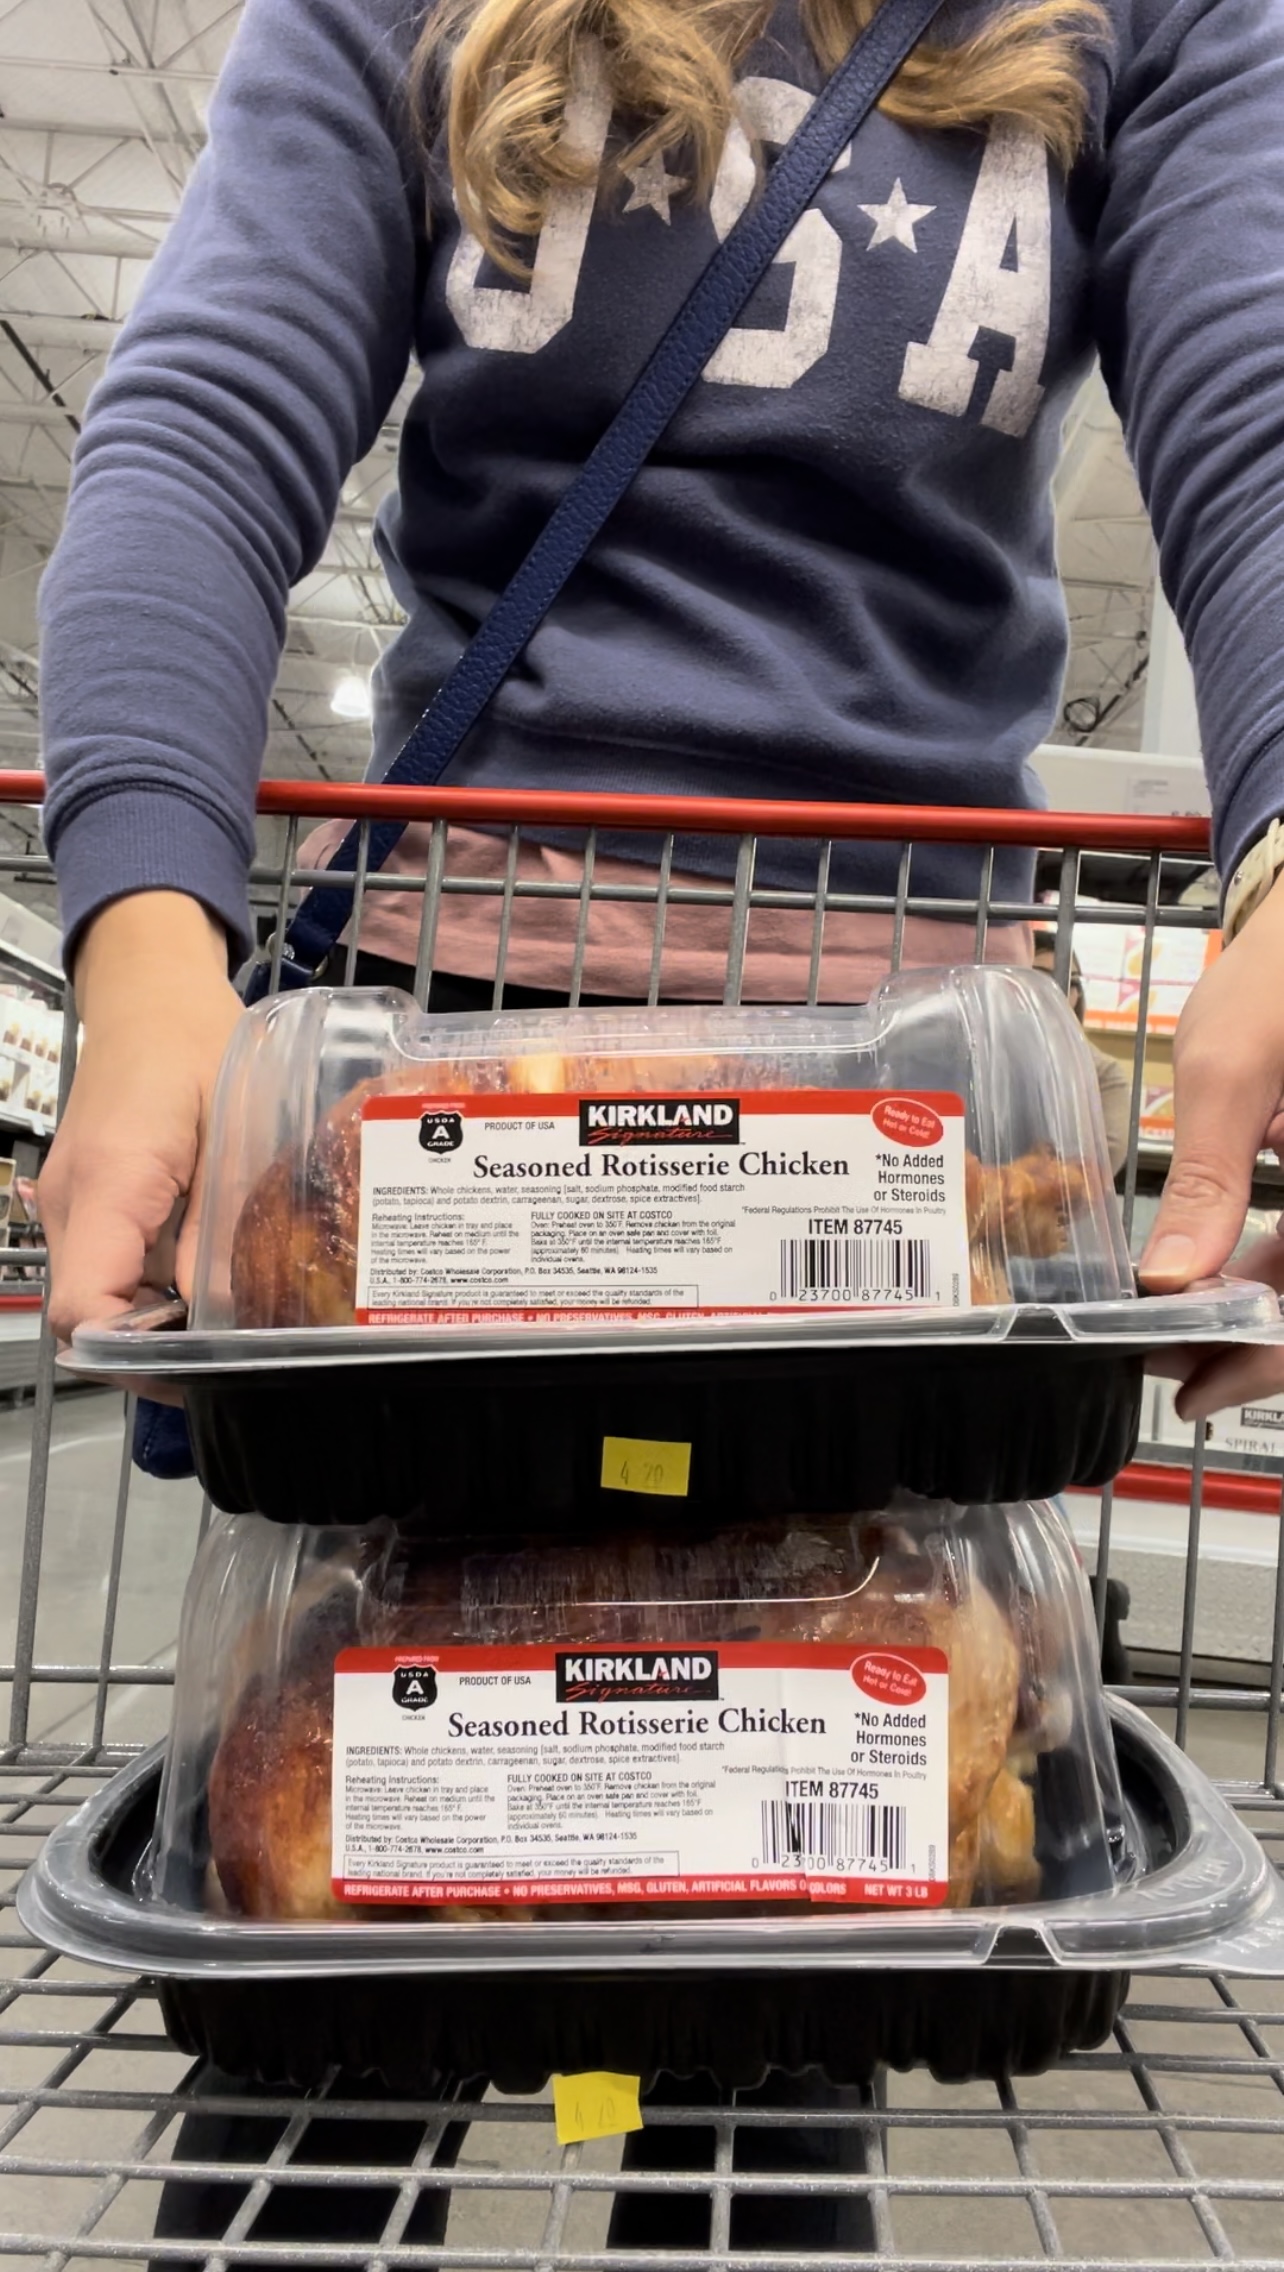 5 Dinners with 2 Costco Rotisserie Chickens